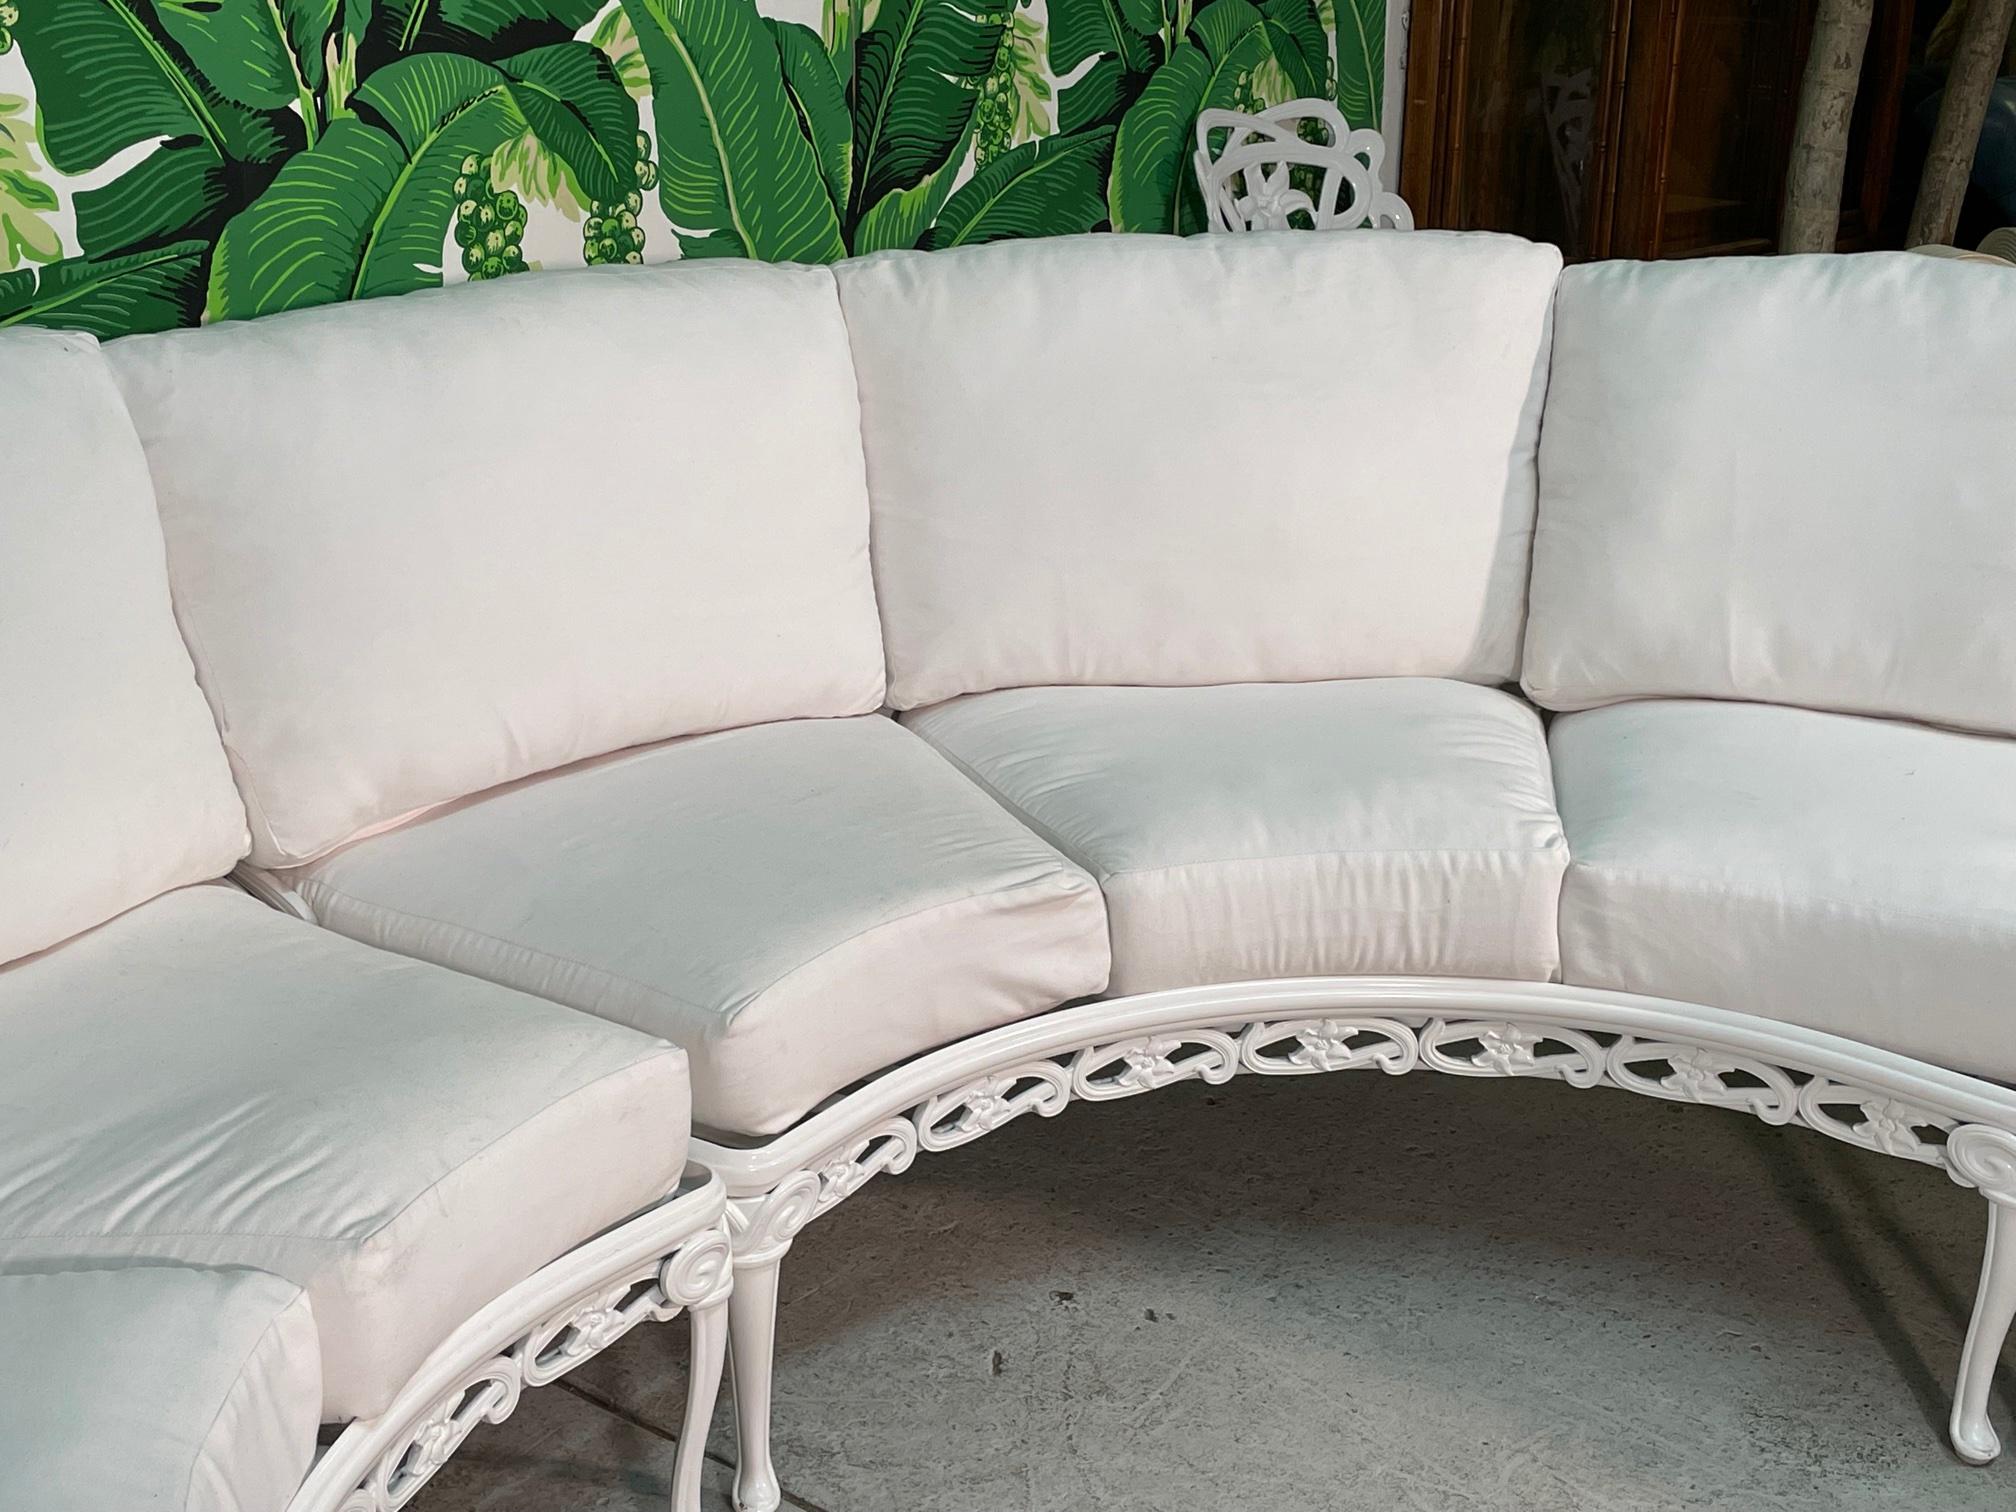 Large round cast aluminum patio sofa by Brown Jordan from their Day Lily collection. Sold exclusively through Nieman Marcus.  Four pieces total. Extremely comfortable cushions and perfect incline make for a very relaxing feel, more so than most